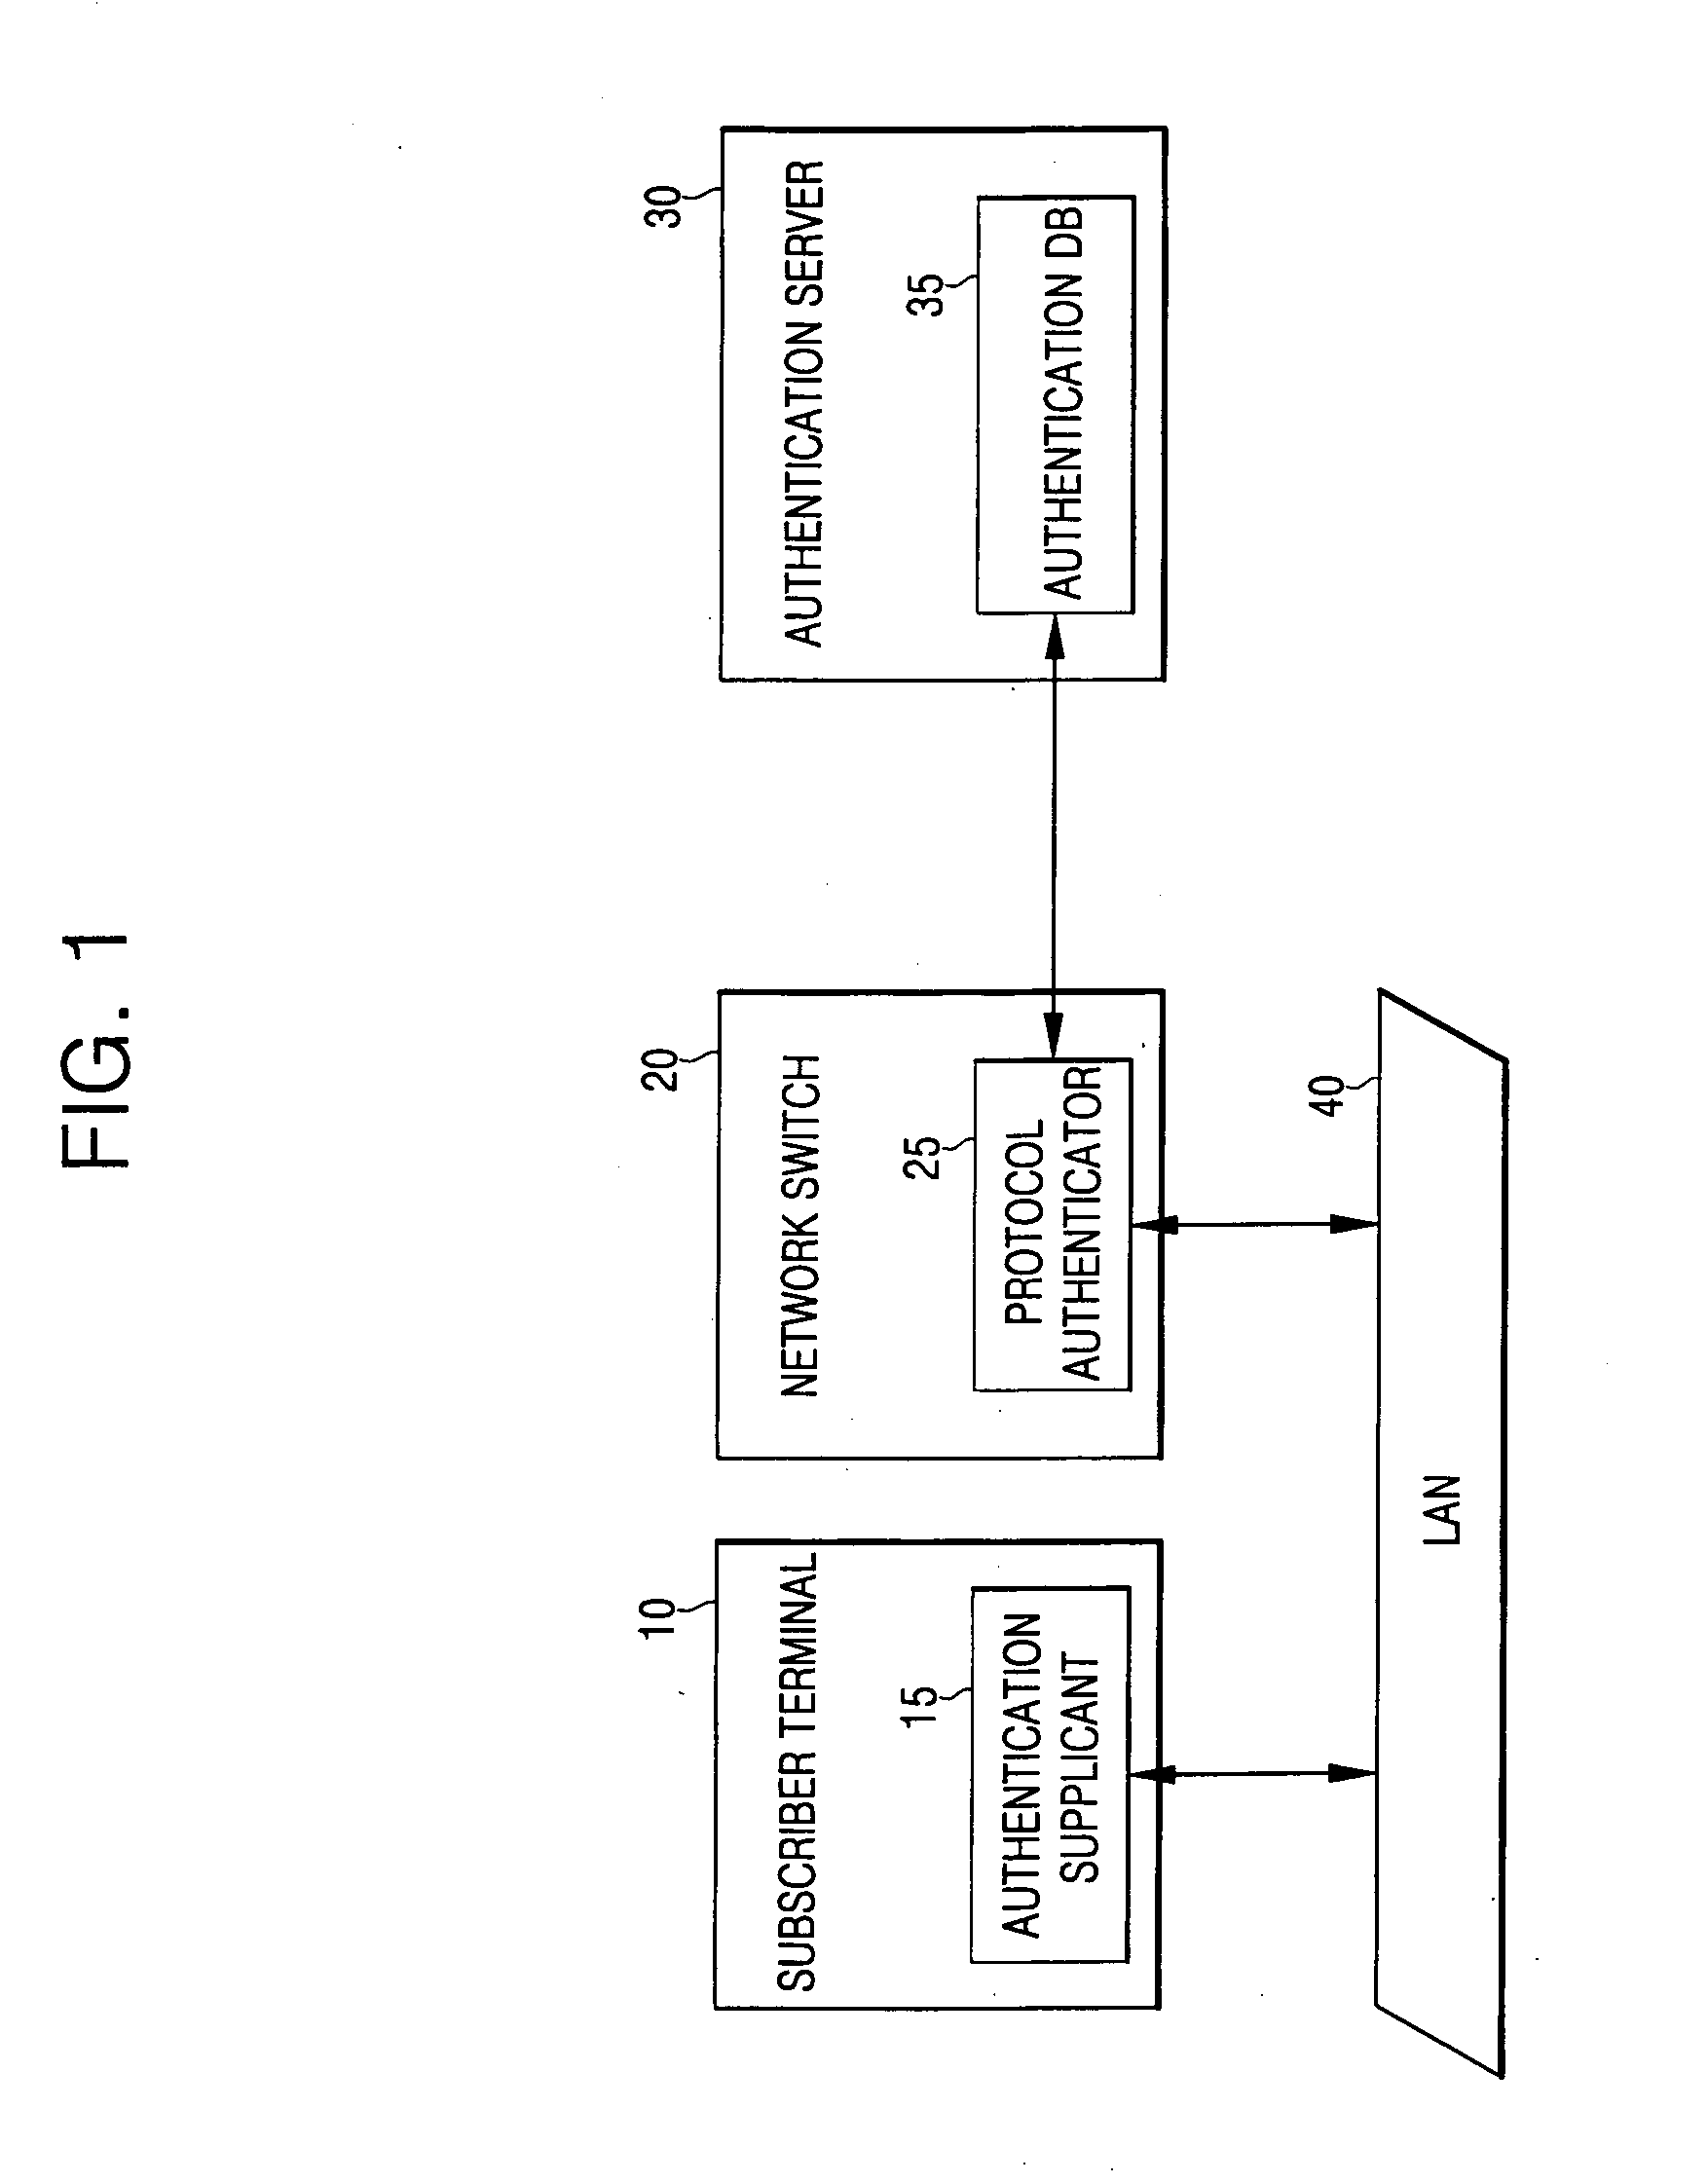 Apparatus and method for authenticating user for network access in communication system